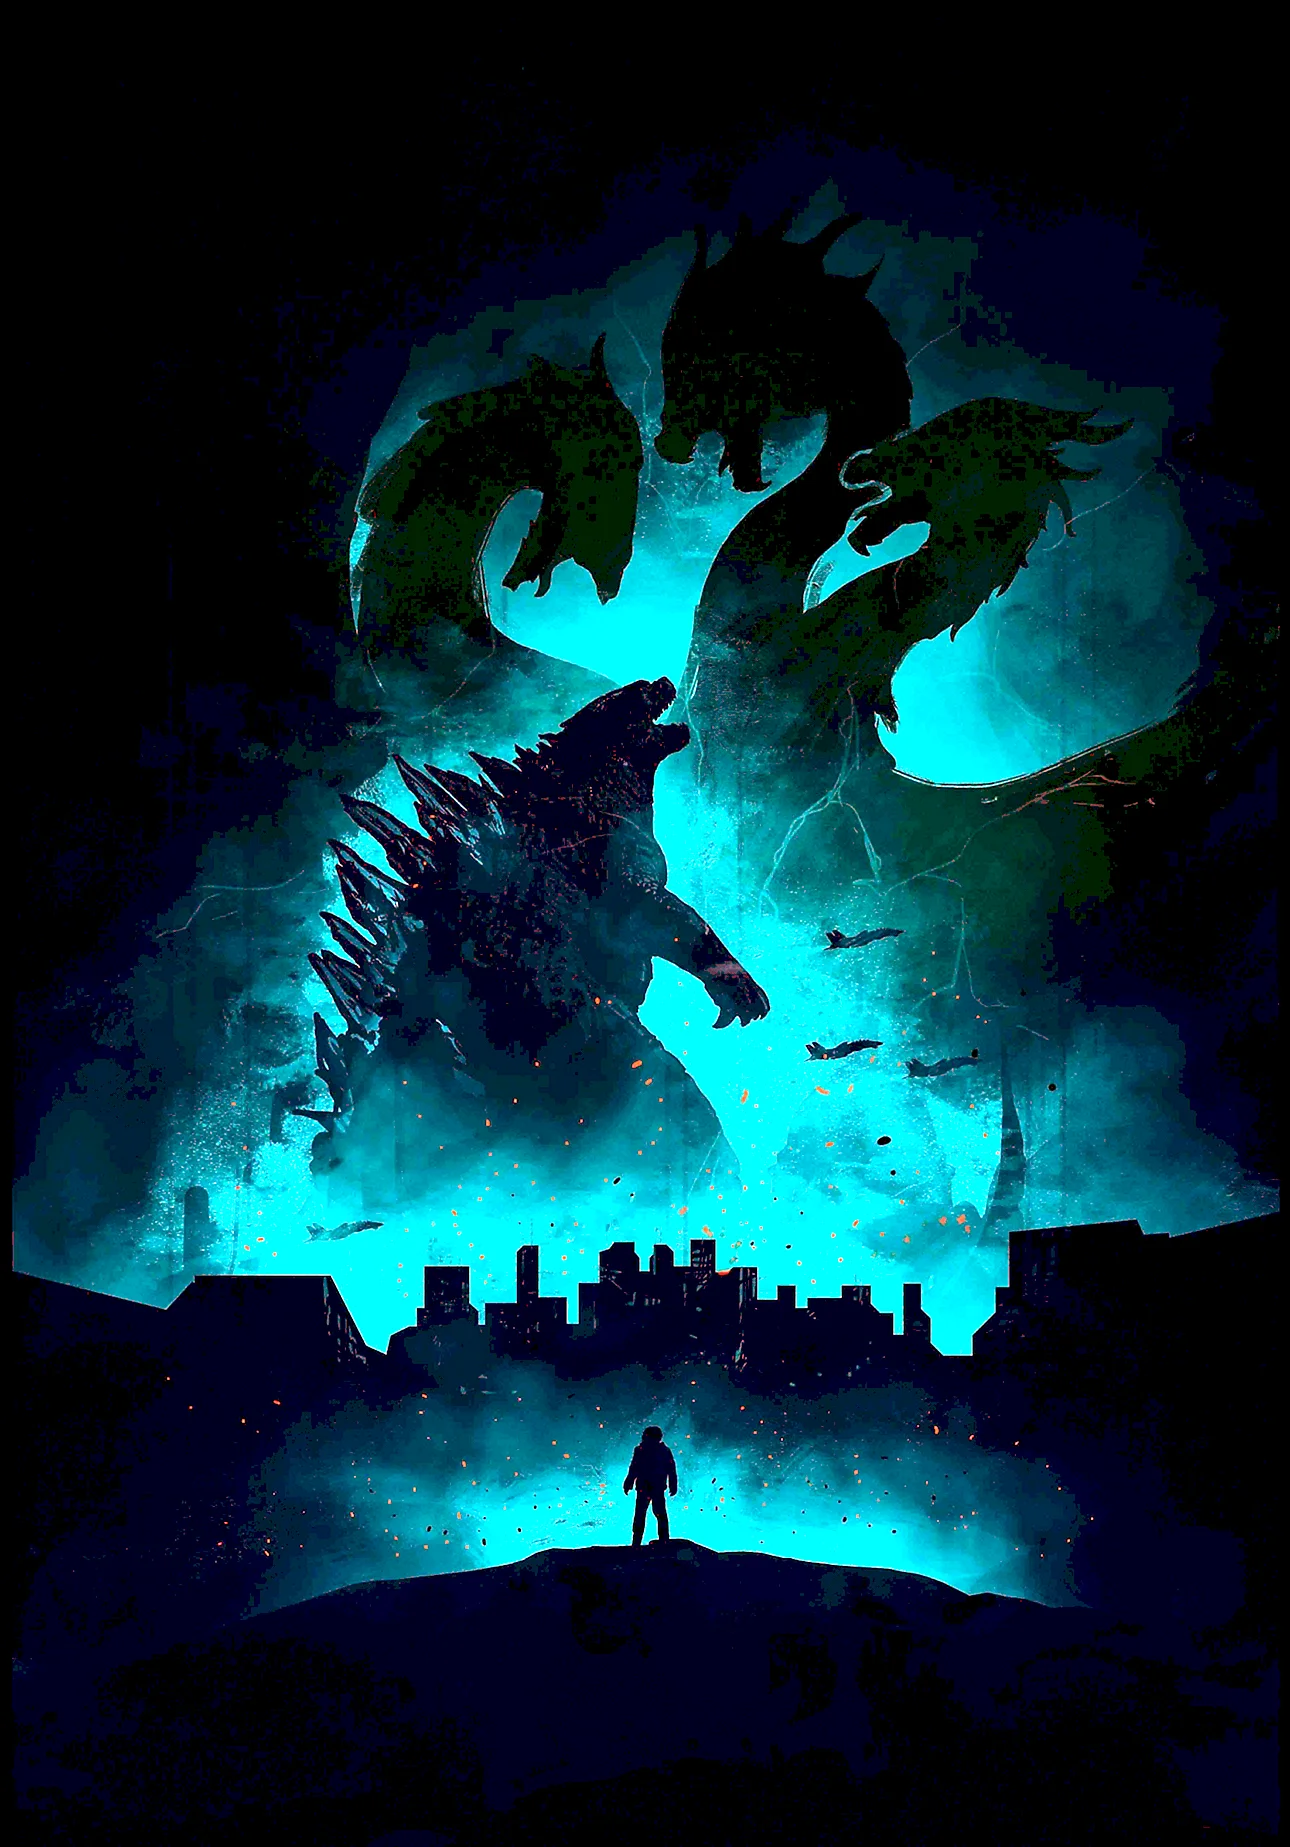 Godzilla Poster Wallpaper For iPhone